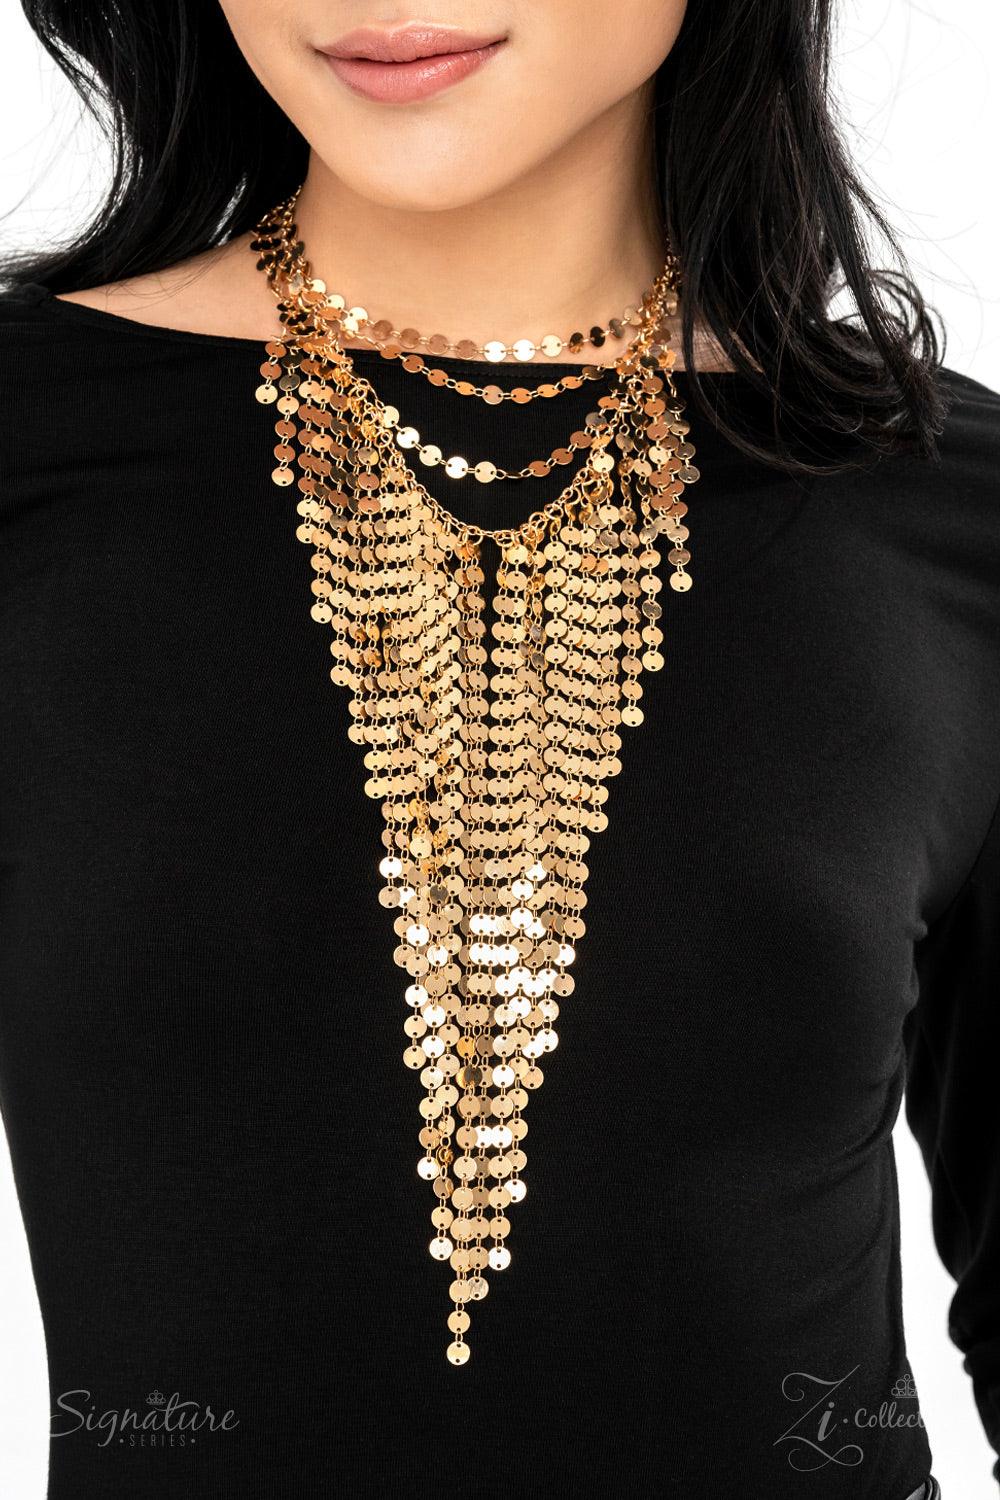 Paparazzi Accessories The Suz A seemingly infinite collection of dainty gold discs flickers and flashes as they catch the light, draping into four shimmery rows down the chest. Twinkly tassels of matching gold discs stream out from the bottom of the lower